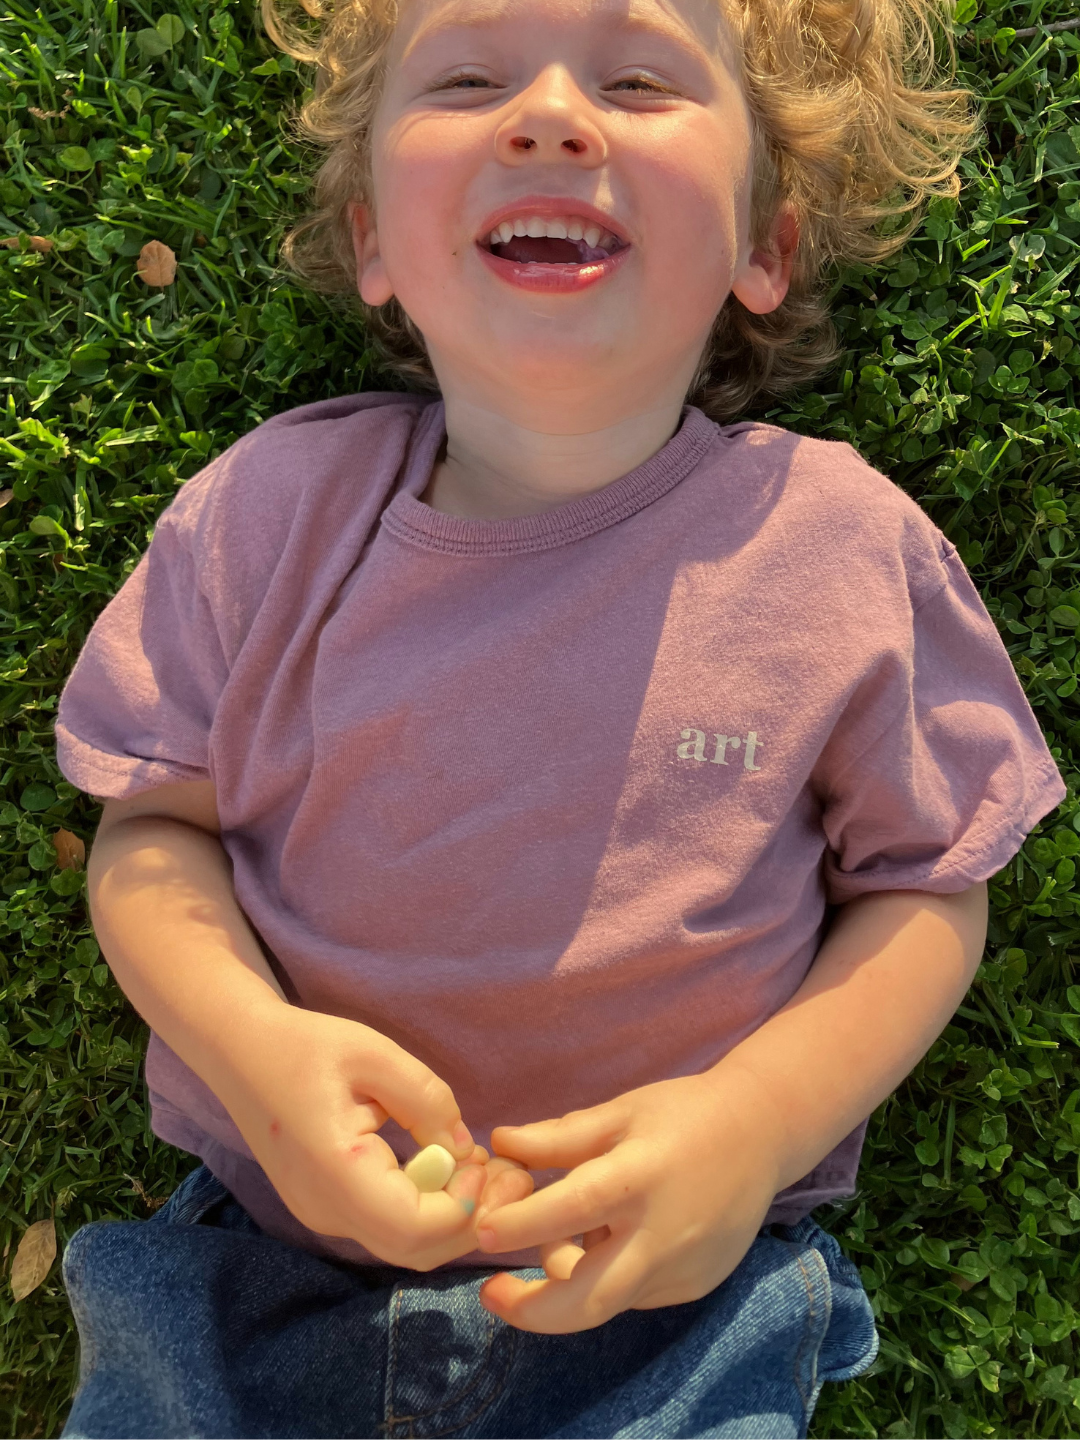 Mauve | A child is wearing the Studio Tee in Mauve with dark denim jeans, laying on the grass laughing